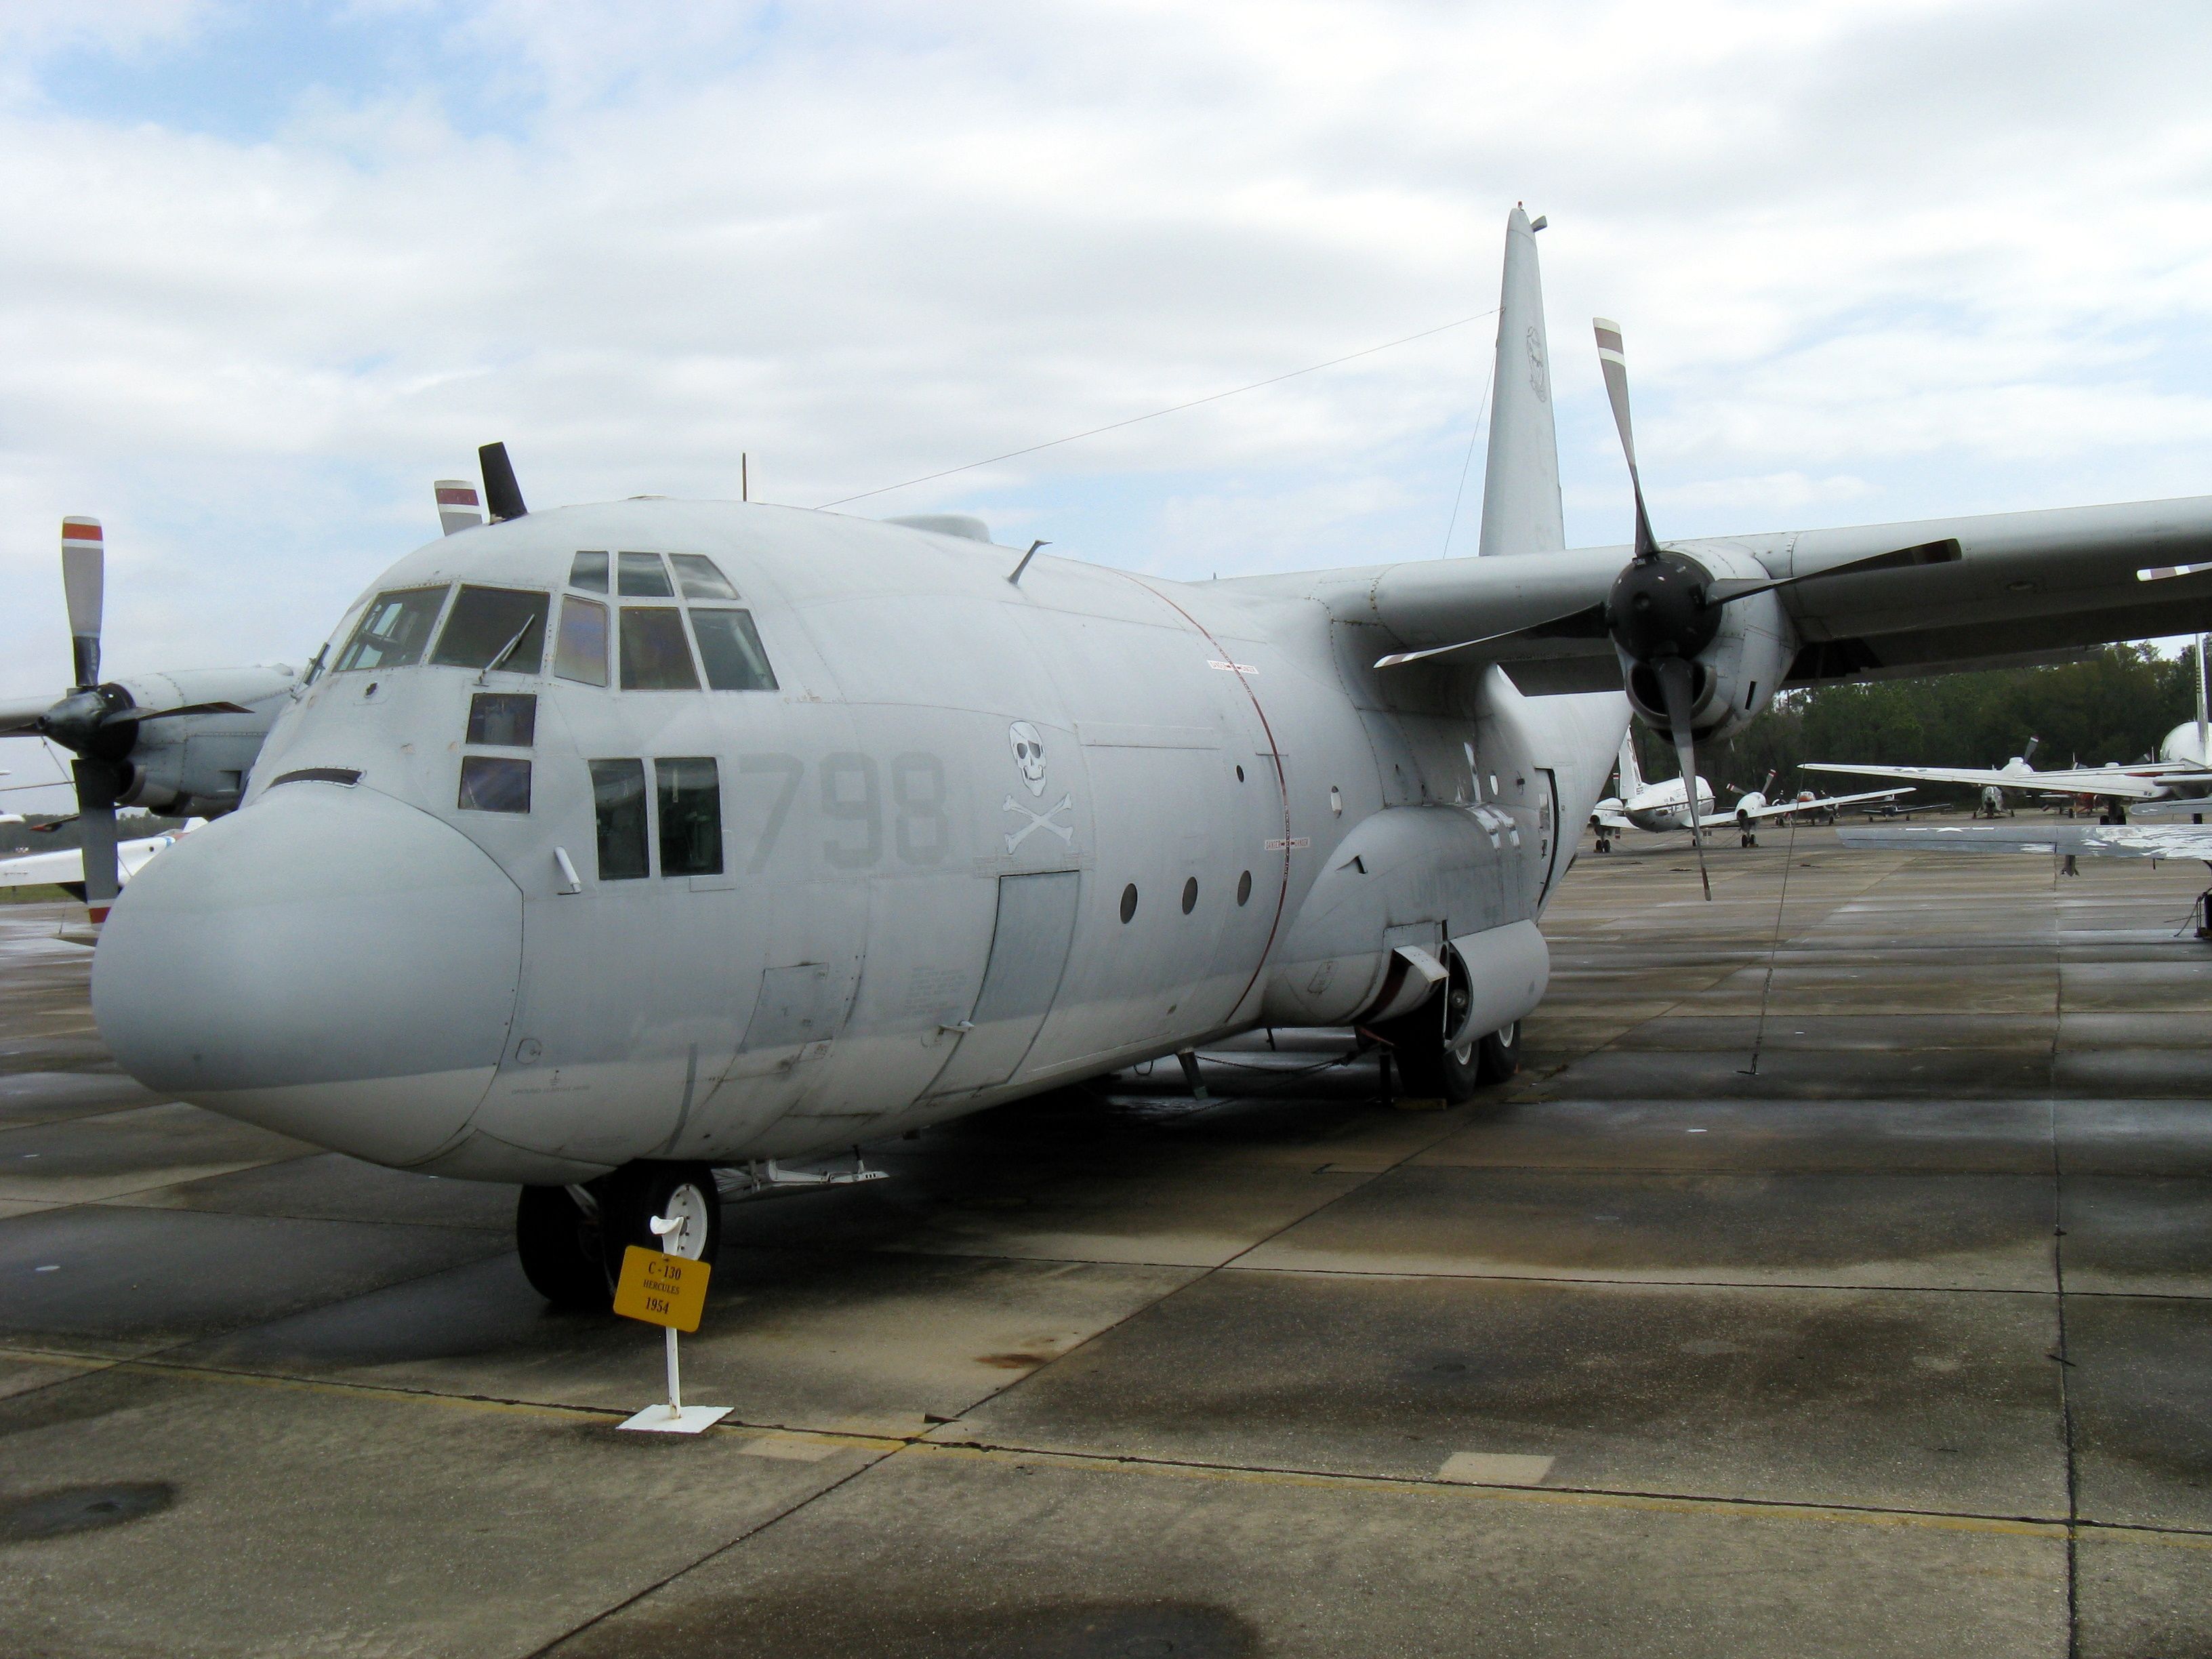 The C-130 used to conduct aircraft carrier tests parked on an airfield.